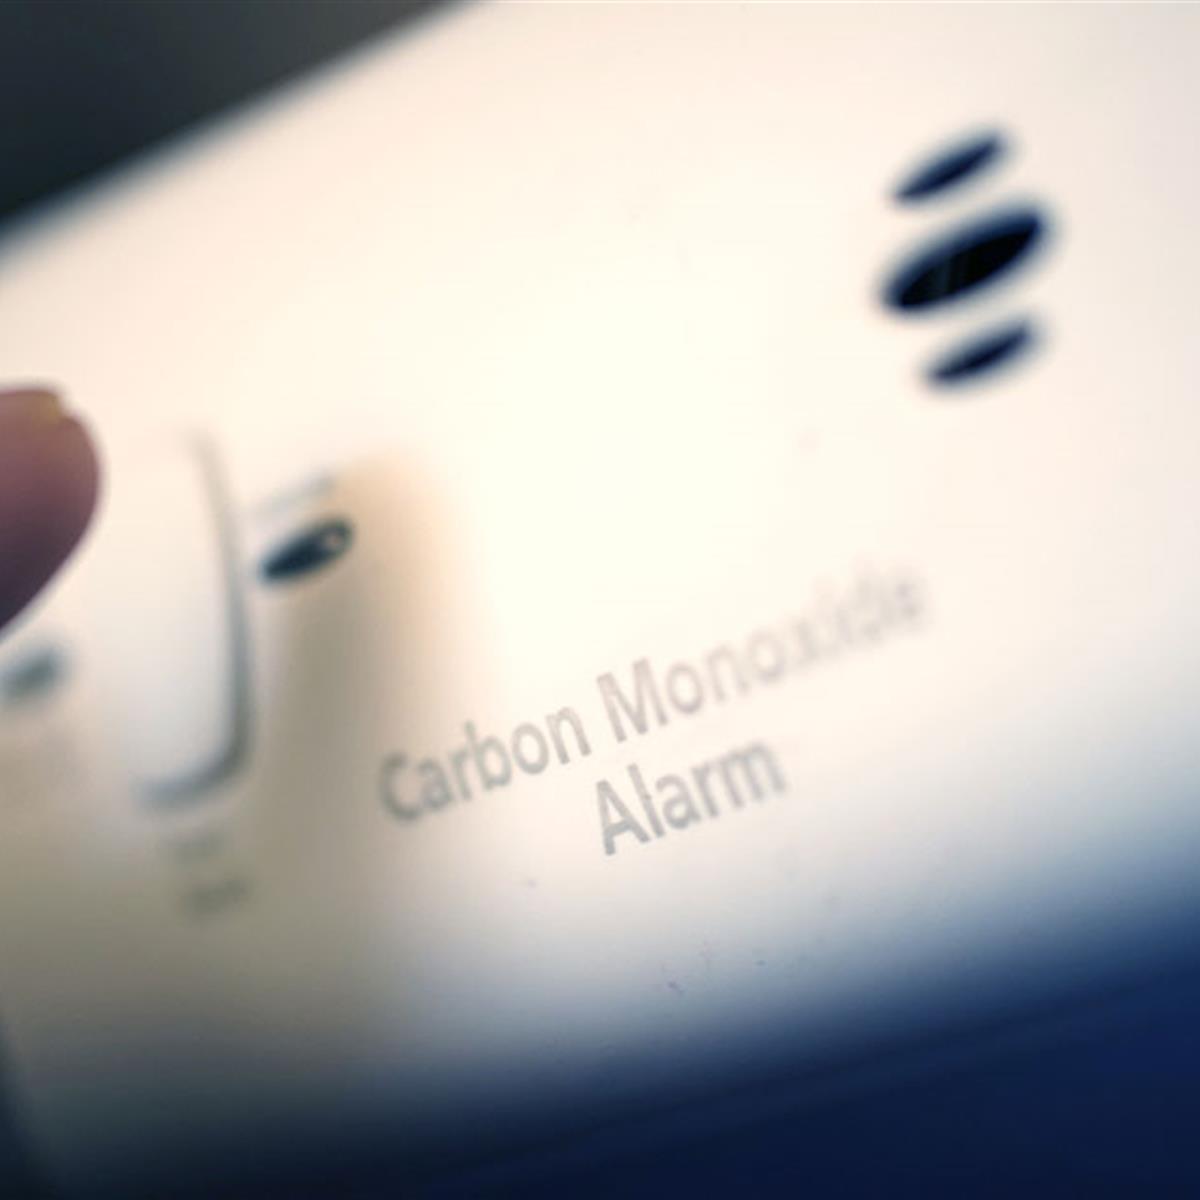 The importance of Smoke and Carbon Monoxide (CO) alarms